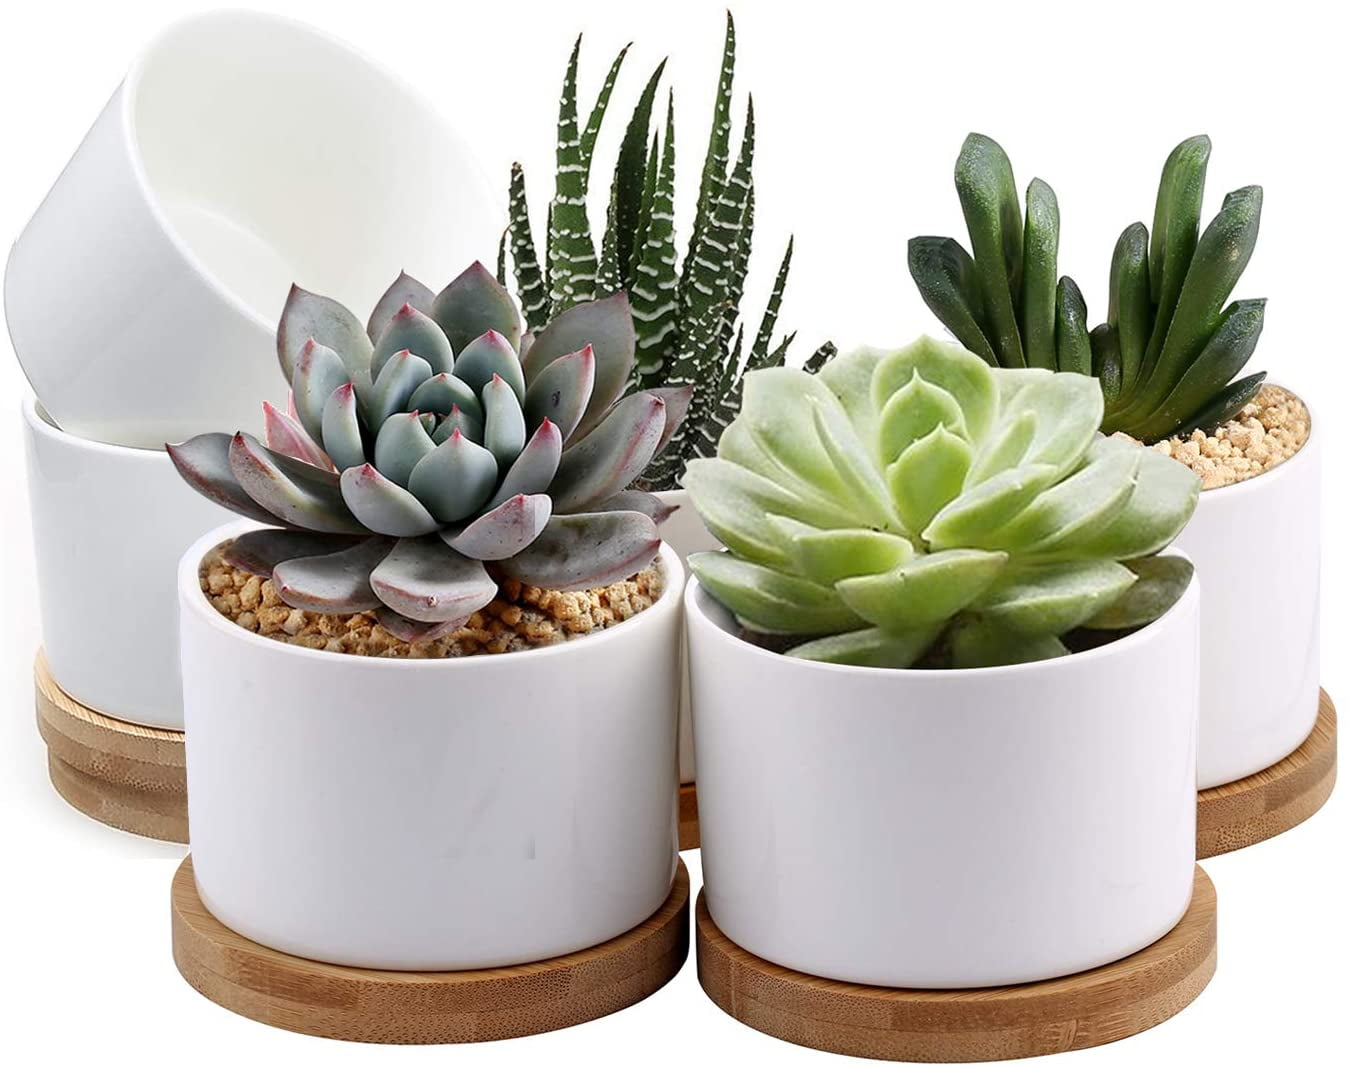 Succulent Planters with Drainage Hole and Bamboo Plant Saucers ZOUTOG 4 inch Colorful Ceramic Flower Pots Succulent Pots 